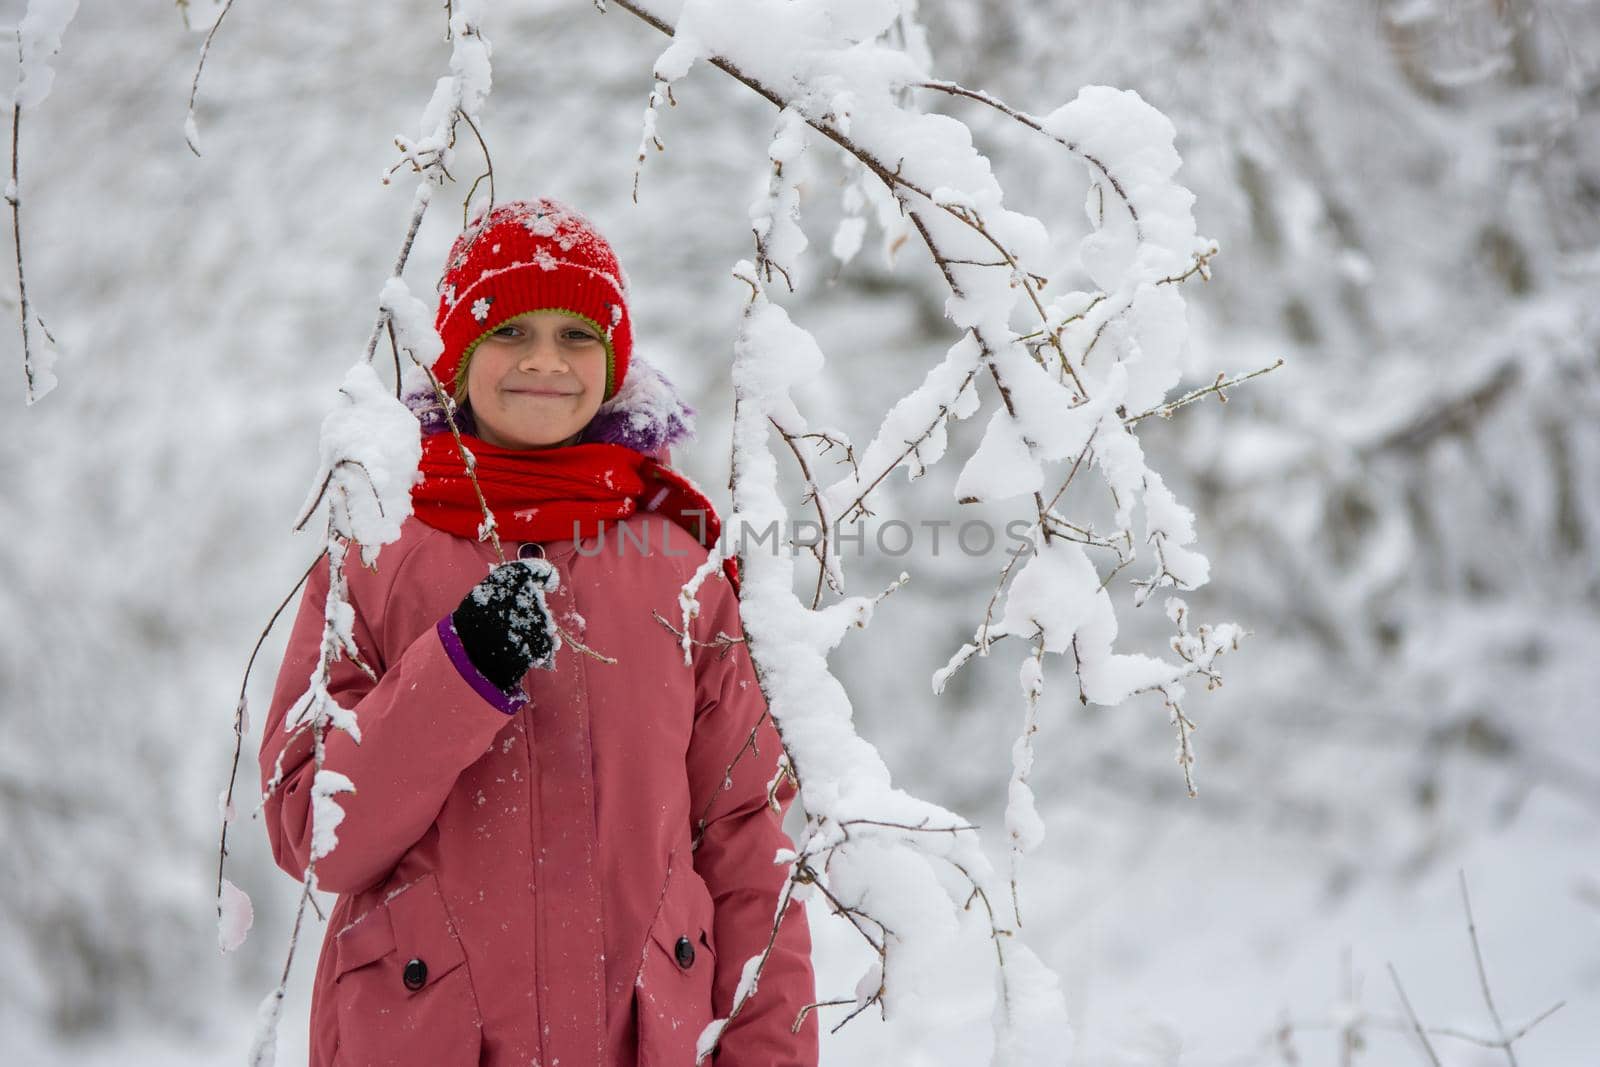 Happy girl stands in a snowy forest under a snowy branch by Madhourse